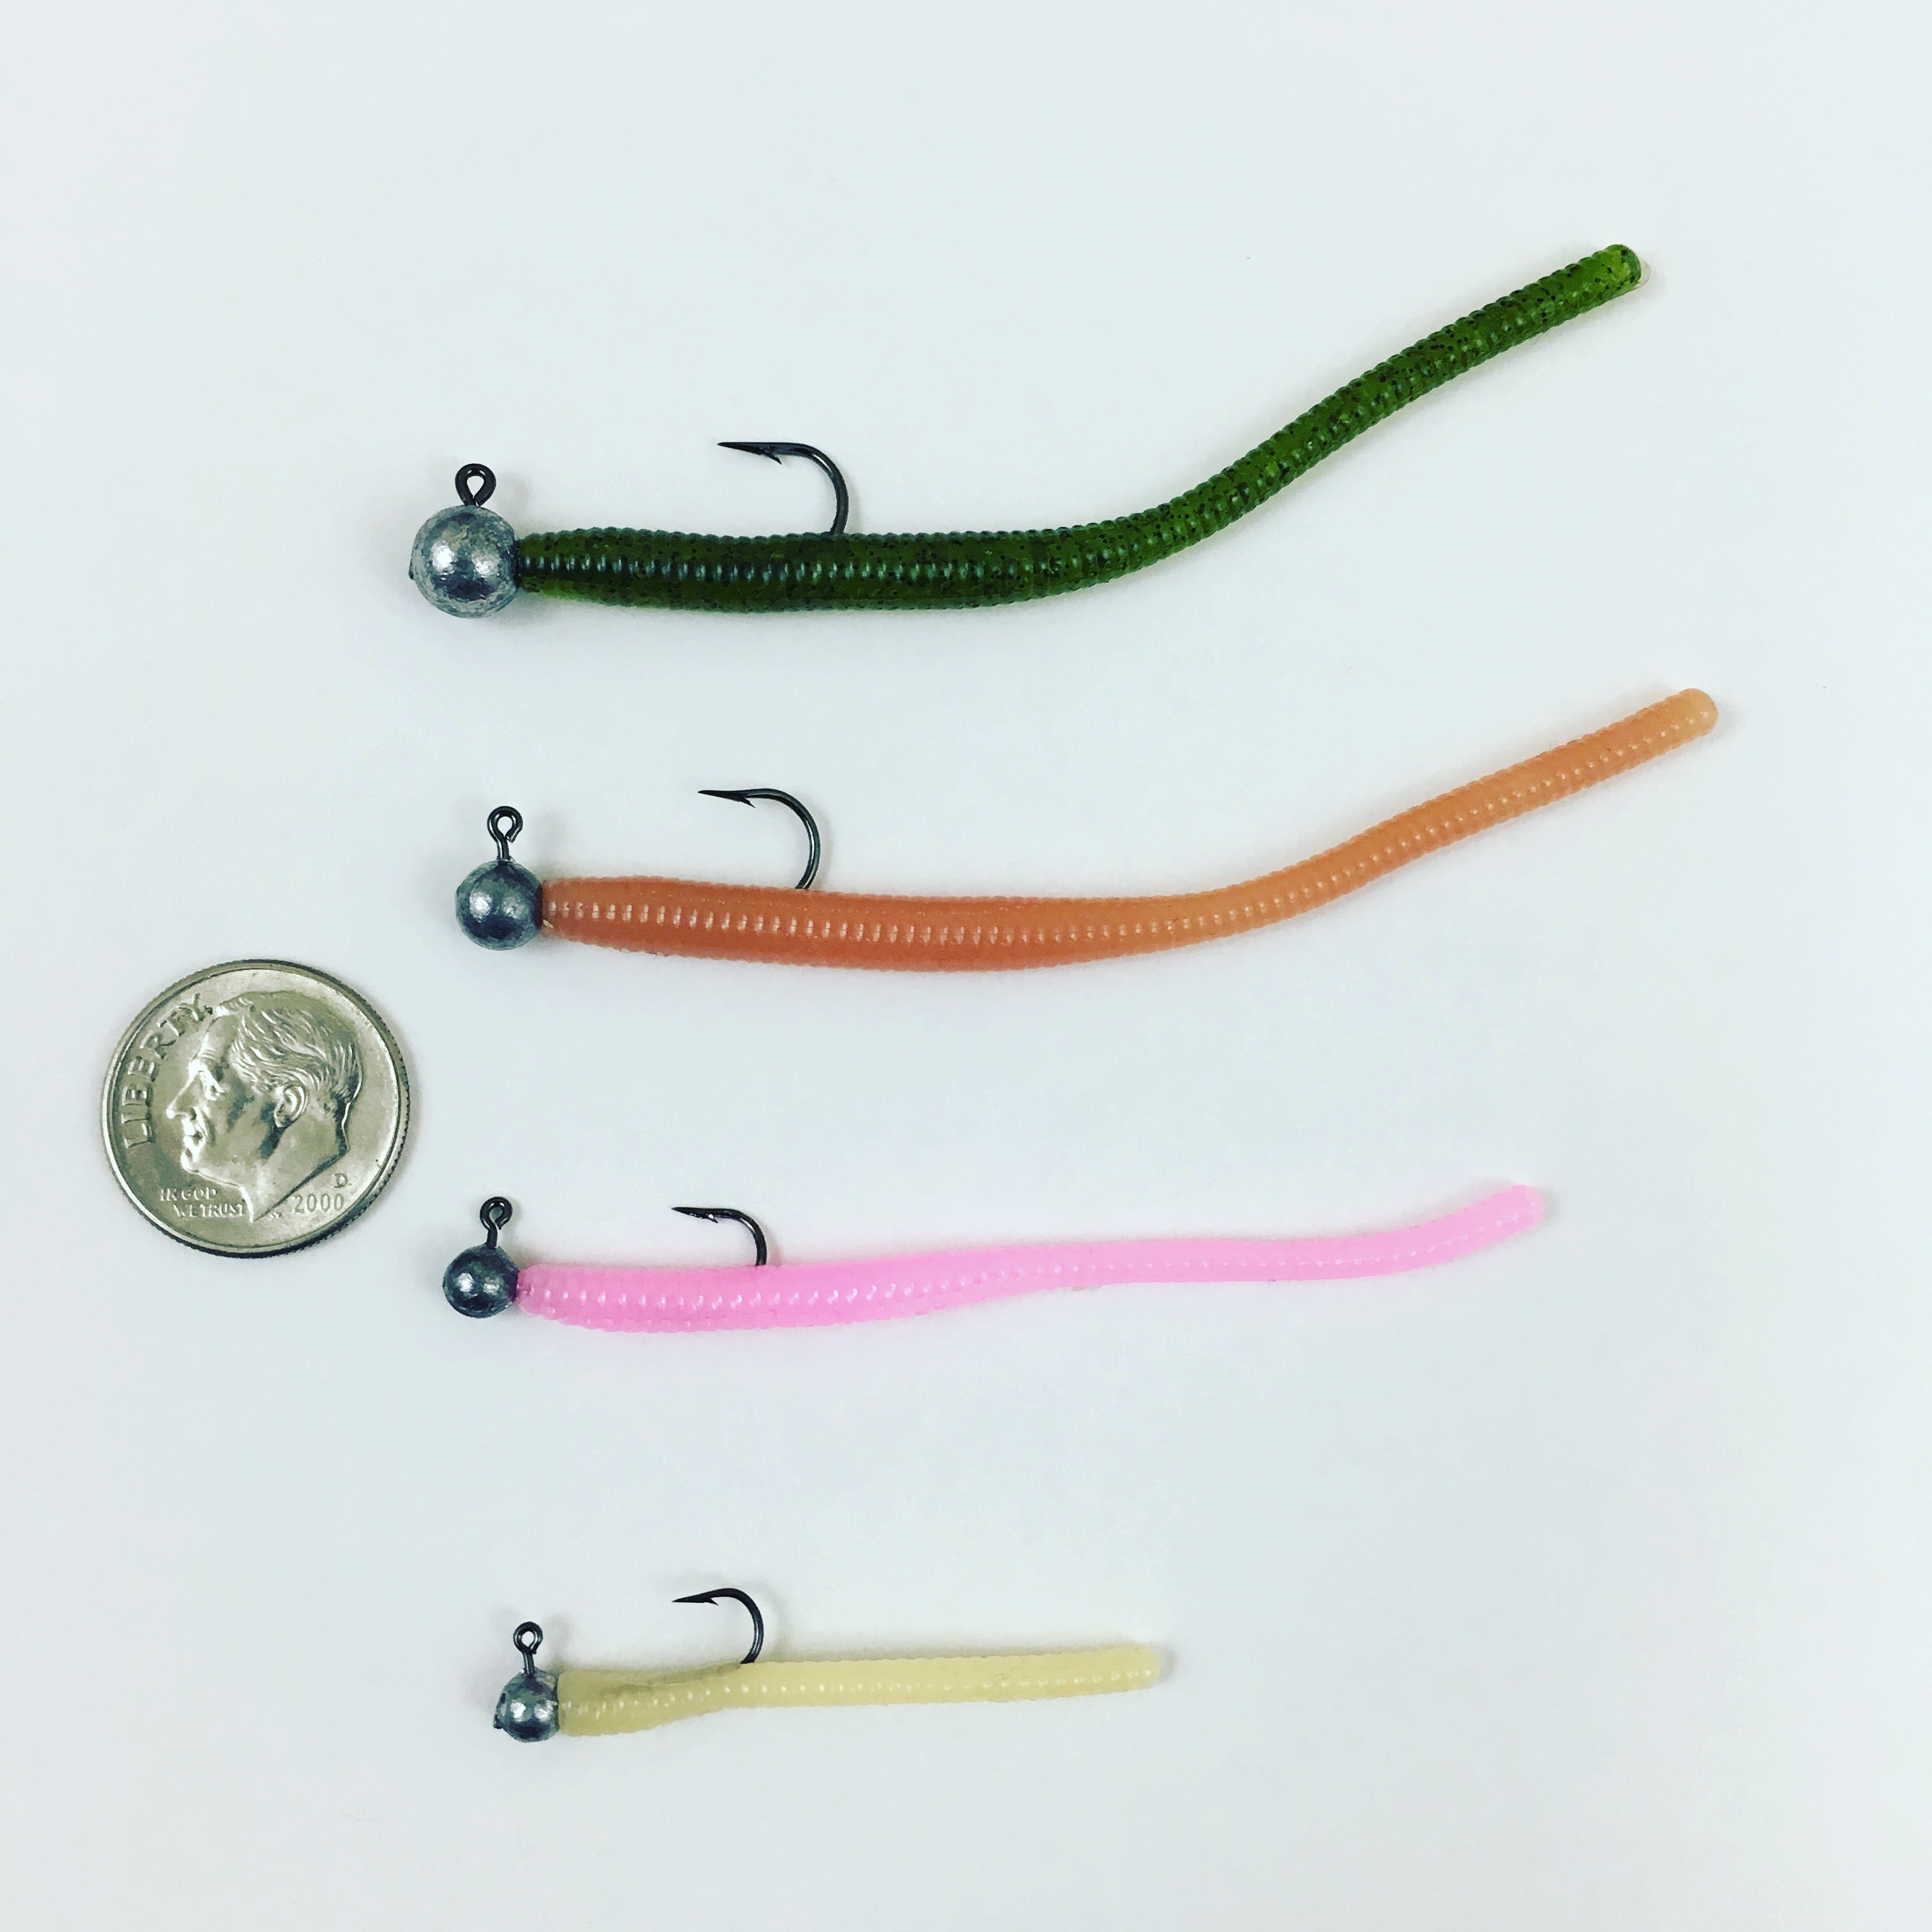 Super Floating Trout Worm with Egg: Fire – Peter's Custom Trout Worms